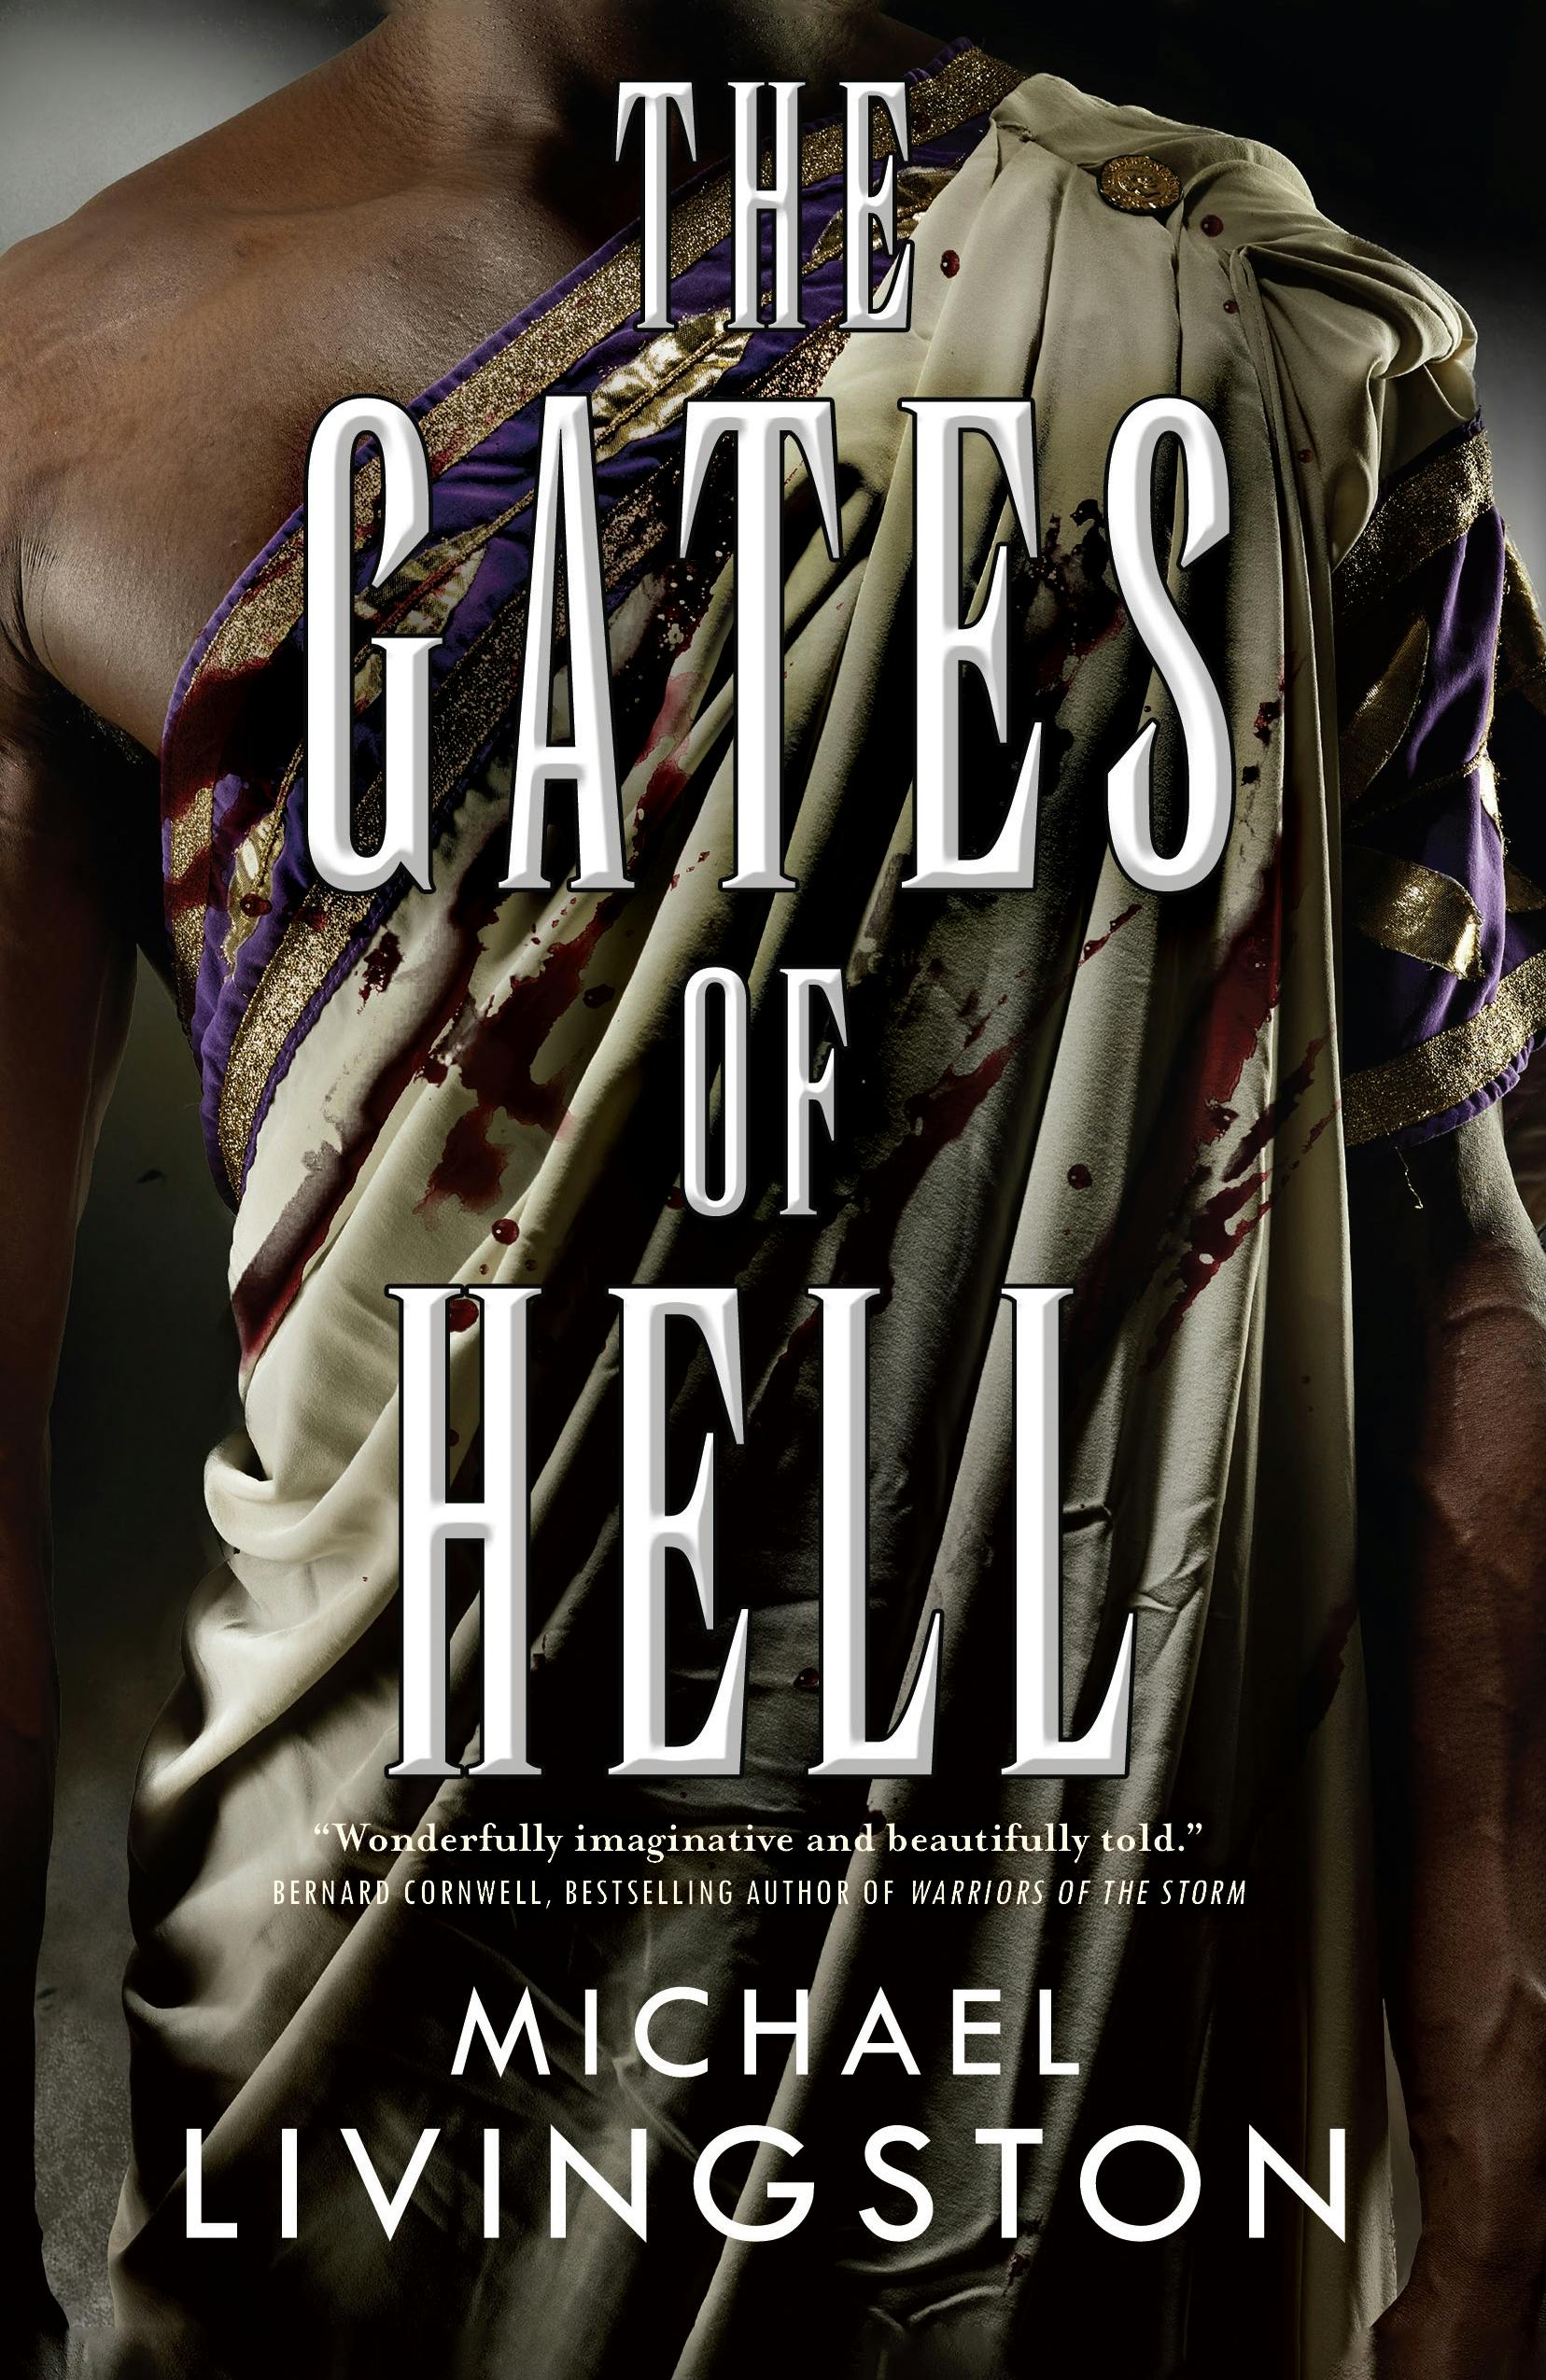 Cover for the book titled as: The Gates of Hell